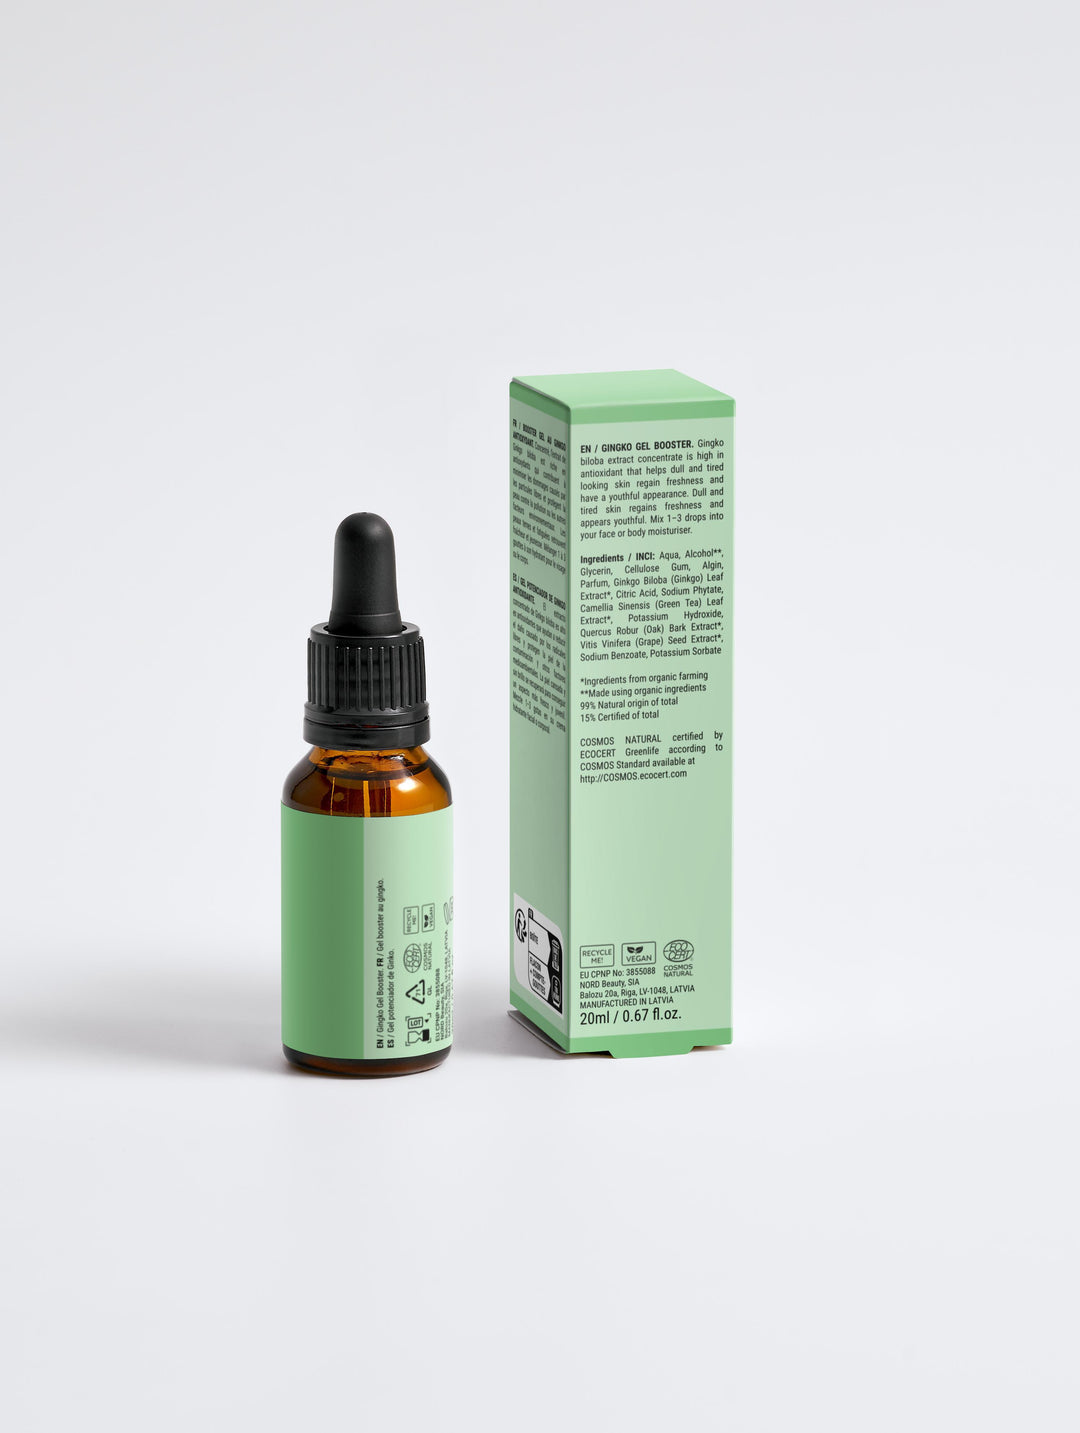 Antioxidant Ginkgo Gel Booster for Youthful Skin Revival